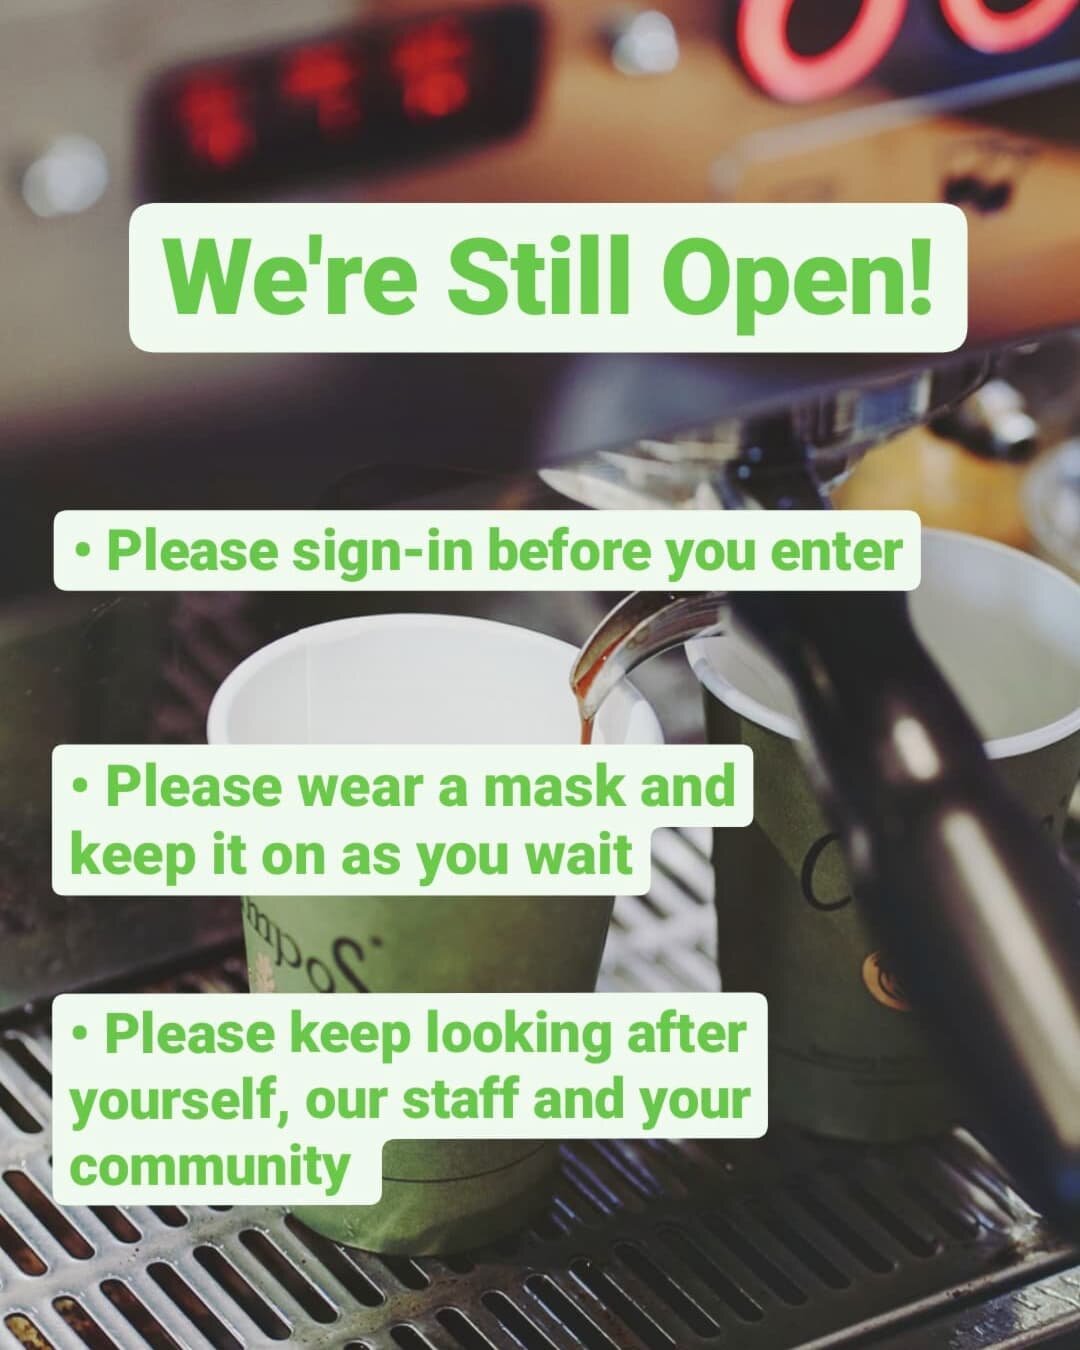 We're Still Open 💚

Both our Shellharbour Village &amp; Calderwood Valley stores remain open 7 days a week with our usual hours.

Please note that in recent days, Signing-In is now mandatory.

It has been strongly recommended to keep your mask on as